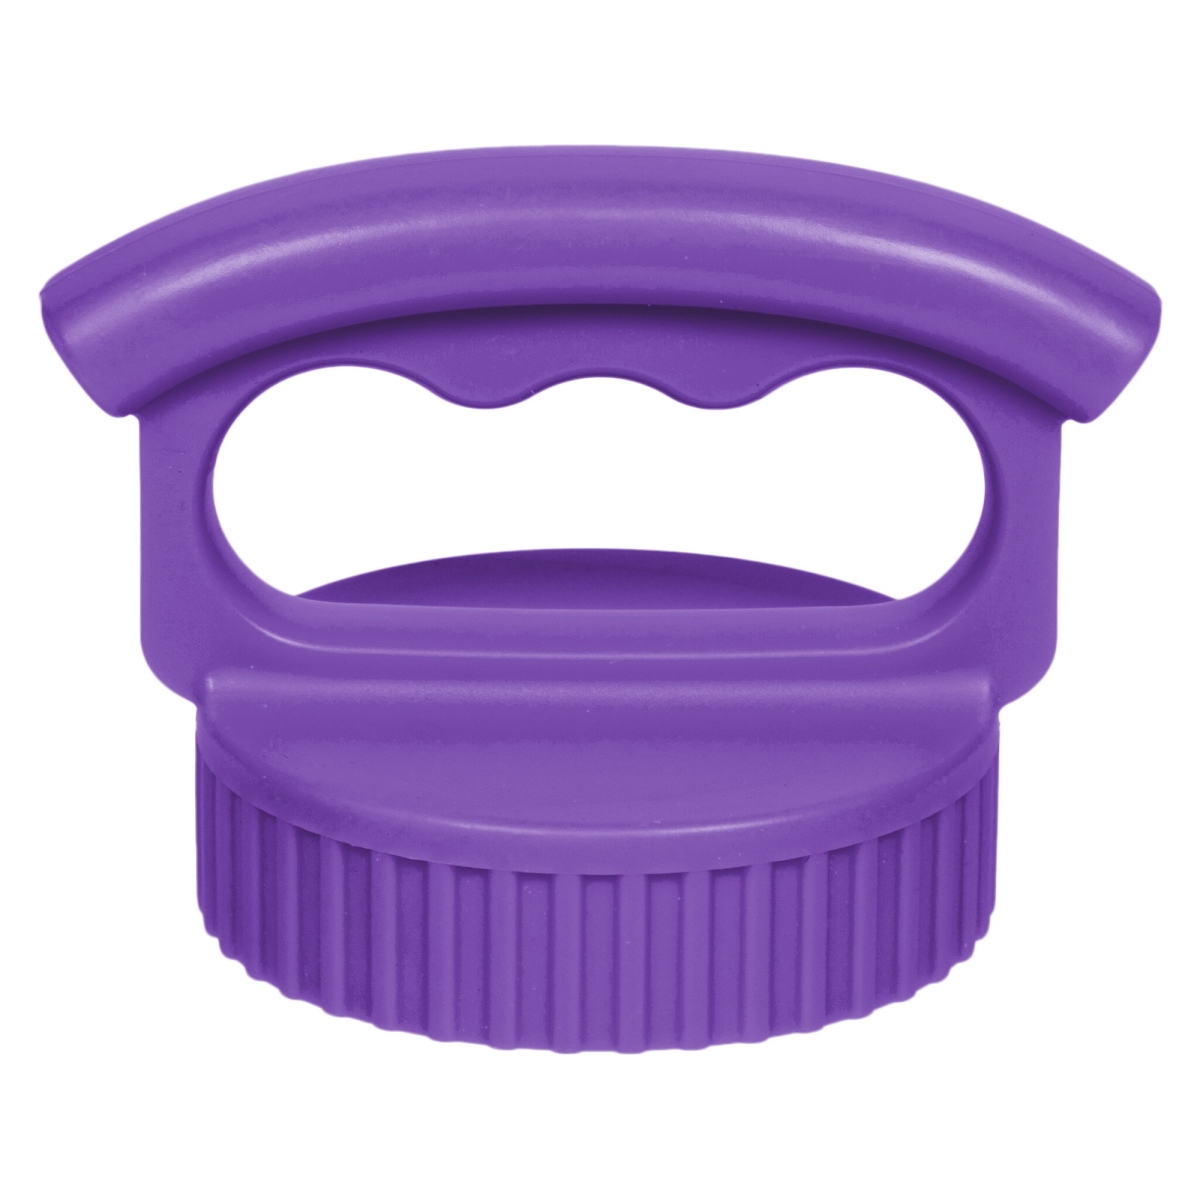 A45003pu0 Fifty & Fifty 3 Finger Caps, Royal Purple